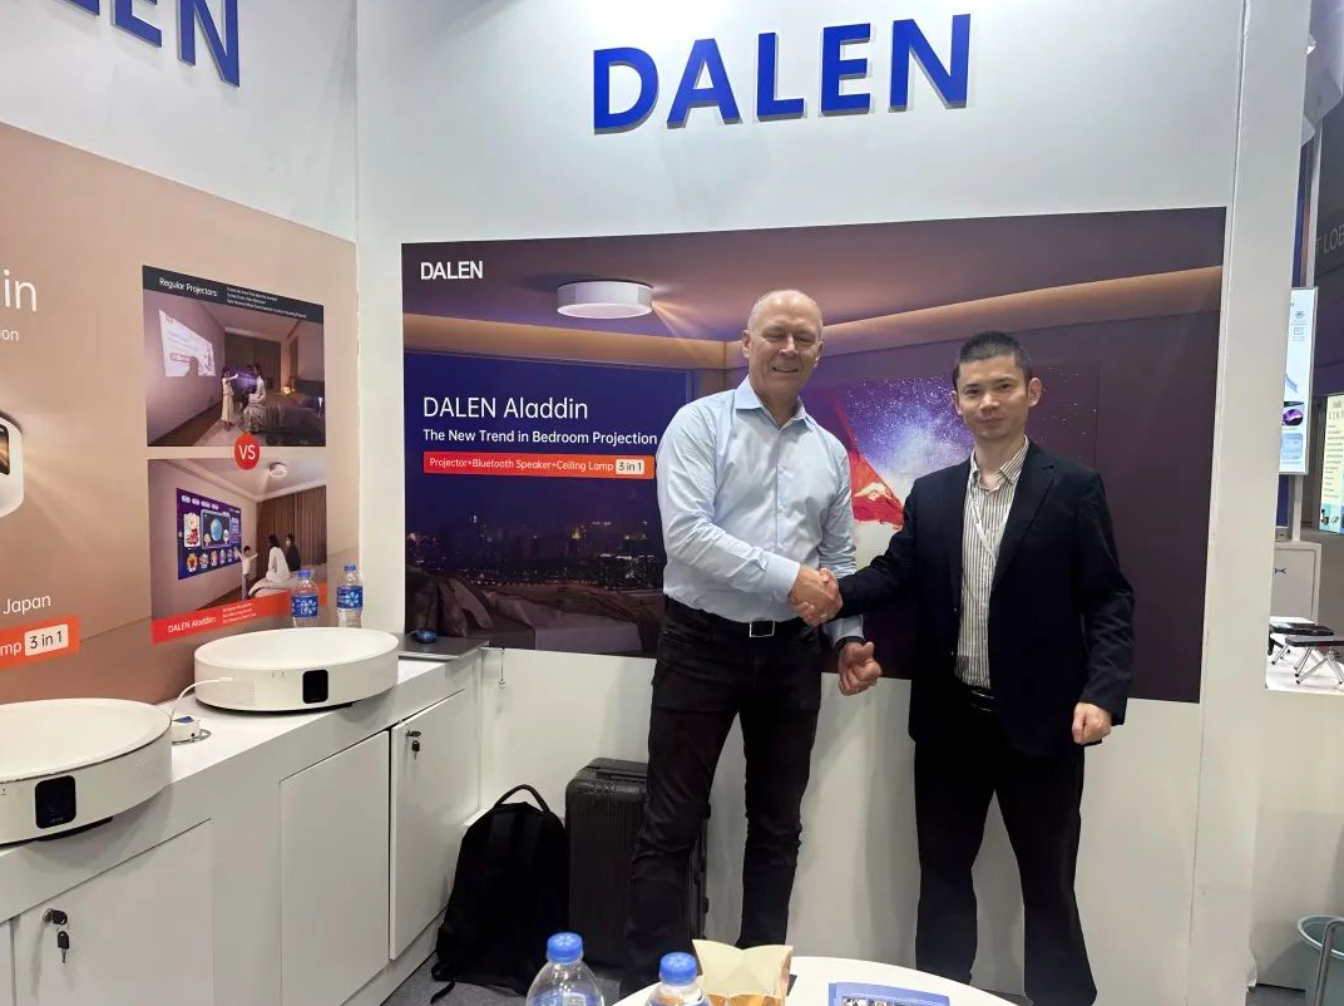 DALEN Aladdin made a stunning appearance at Hong Kong Global Sources Consumer Electronics Show